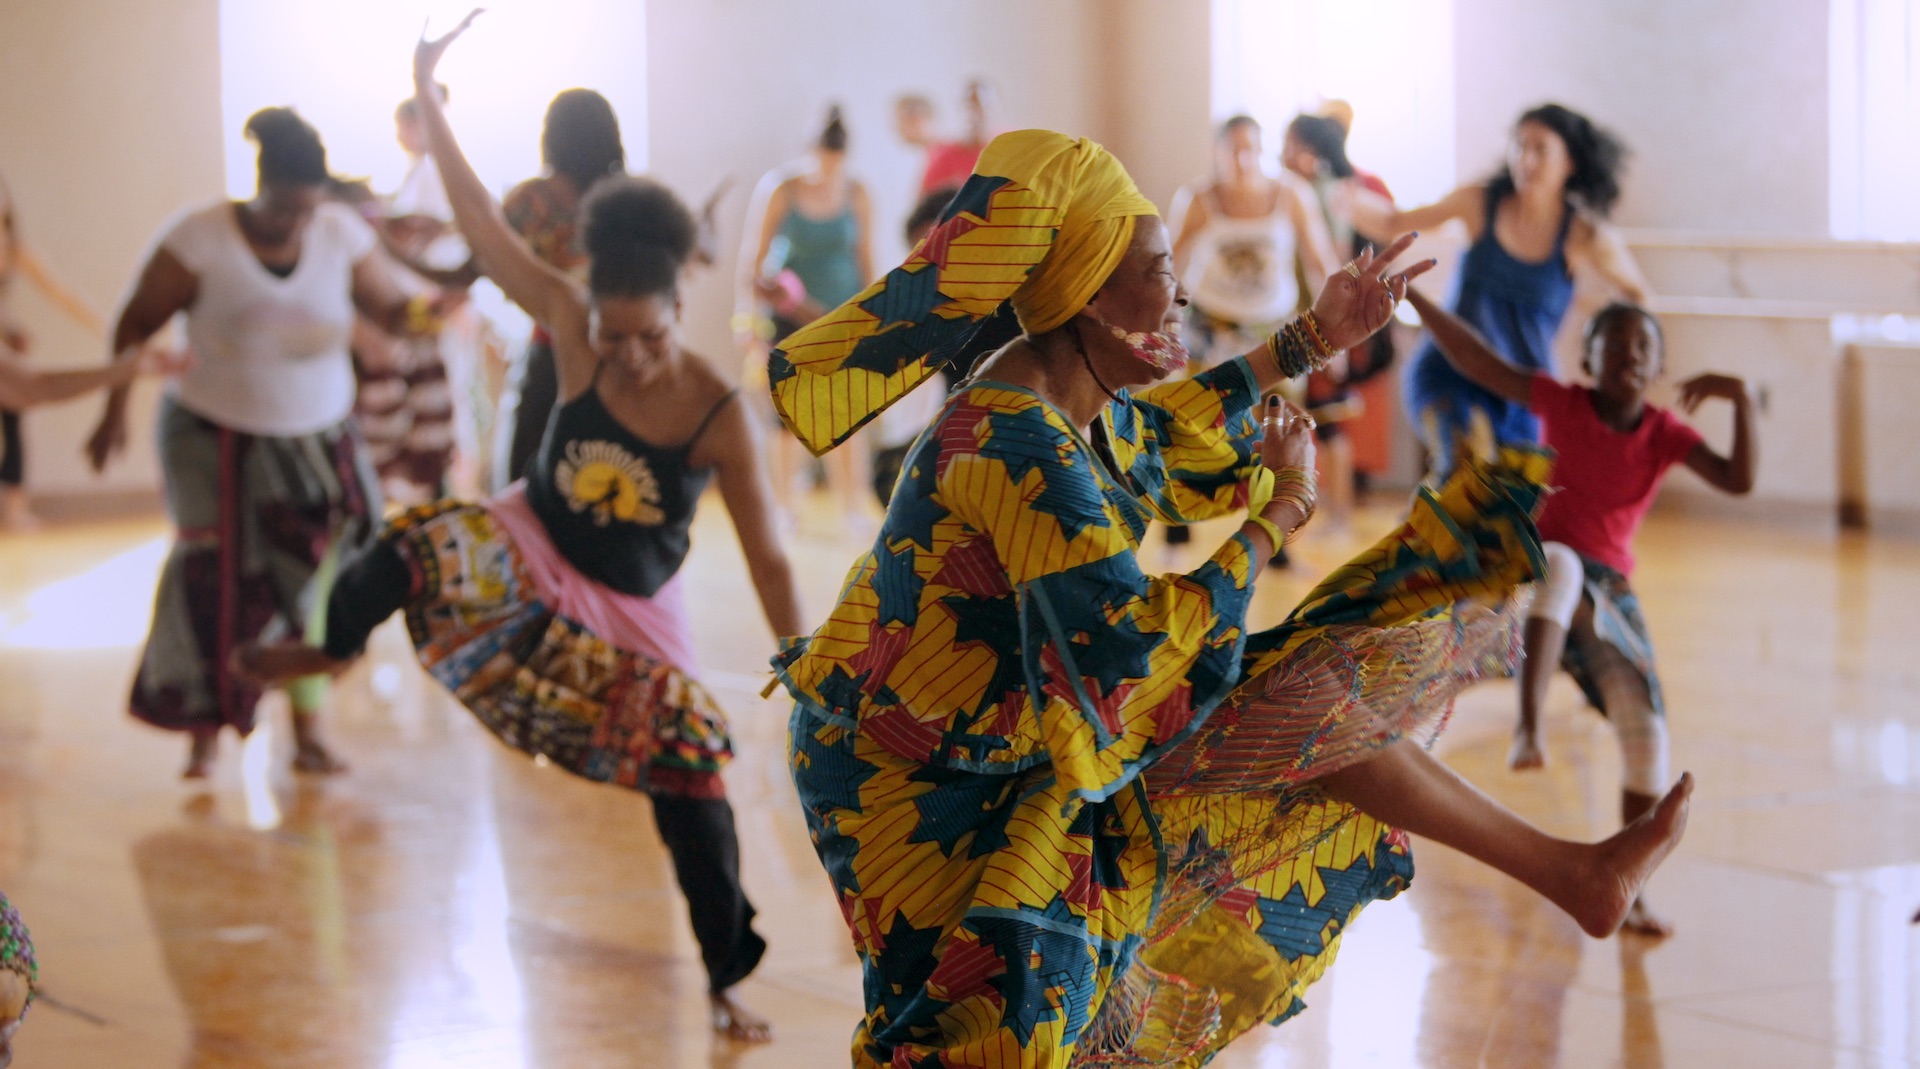 The Diamano Coura West African Dance Company rehearses at the Malonga Casquelourd Center for the Arts.